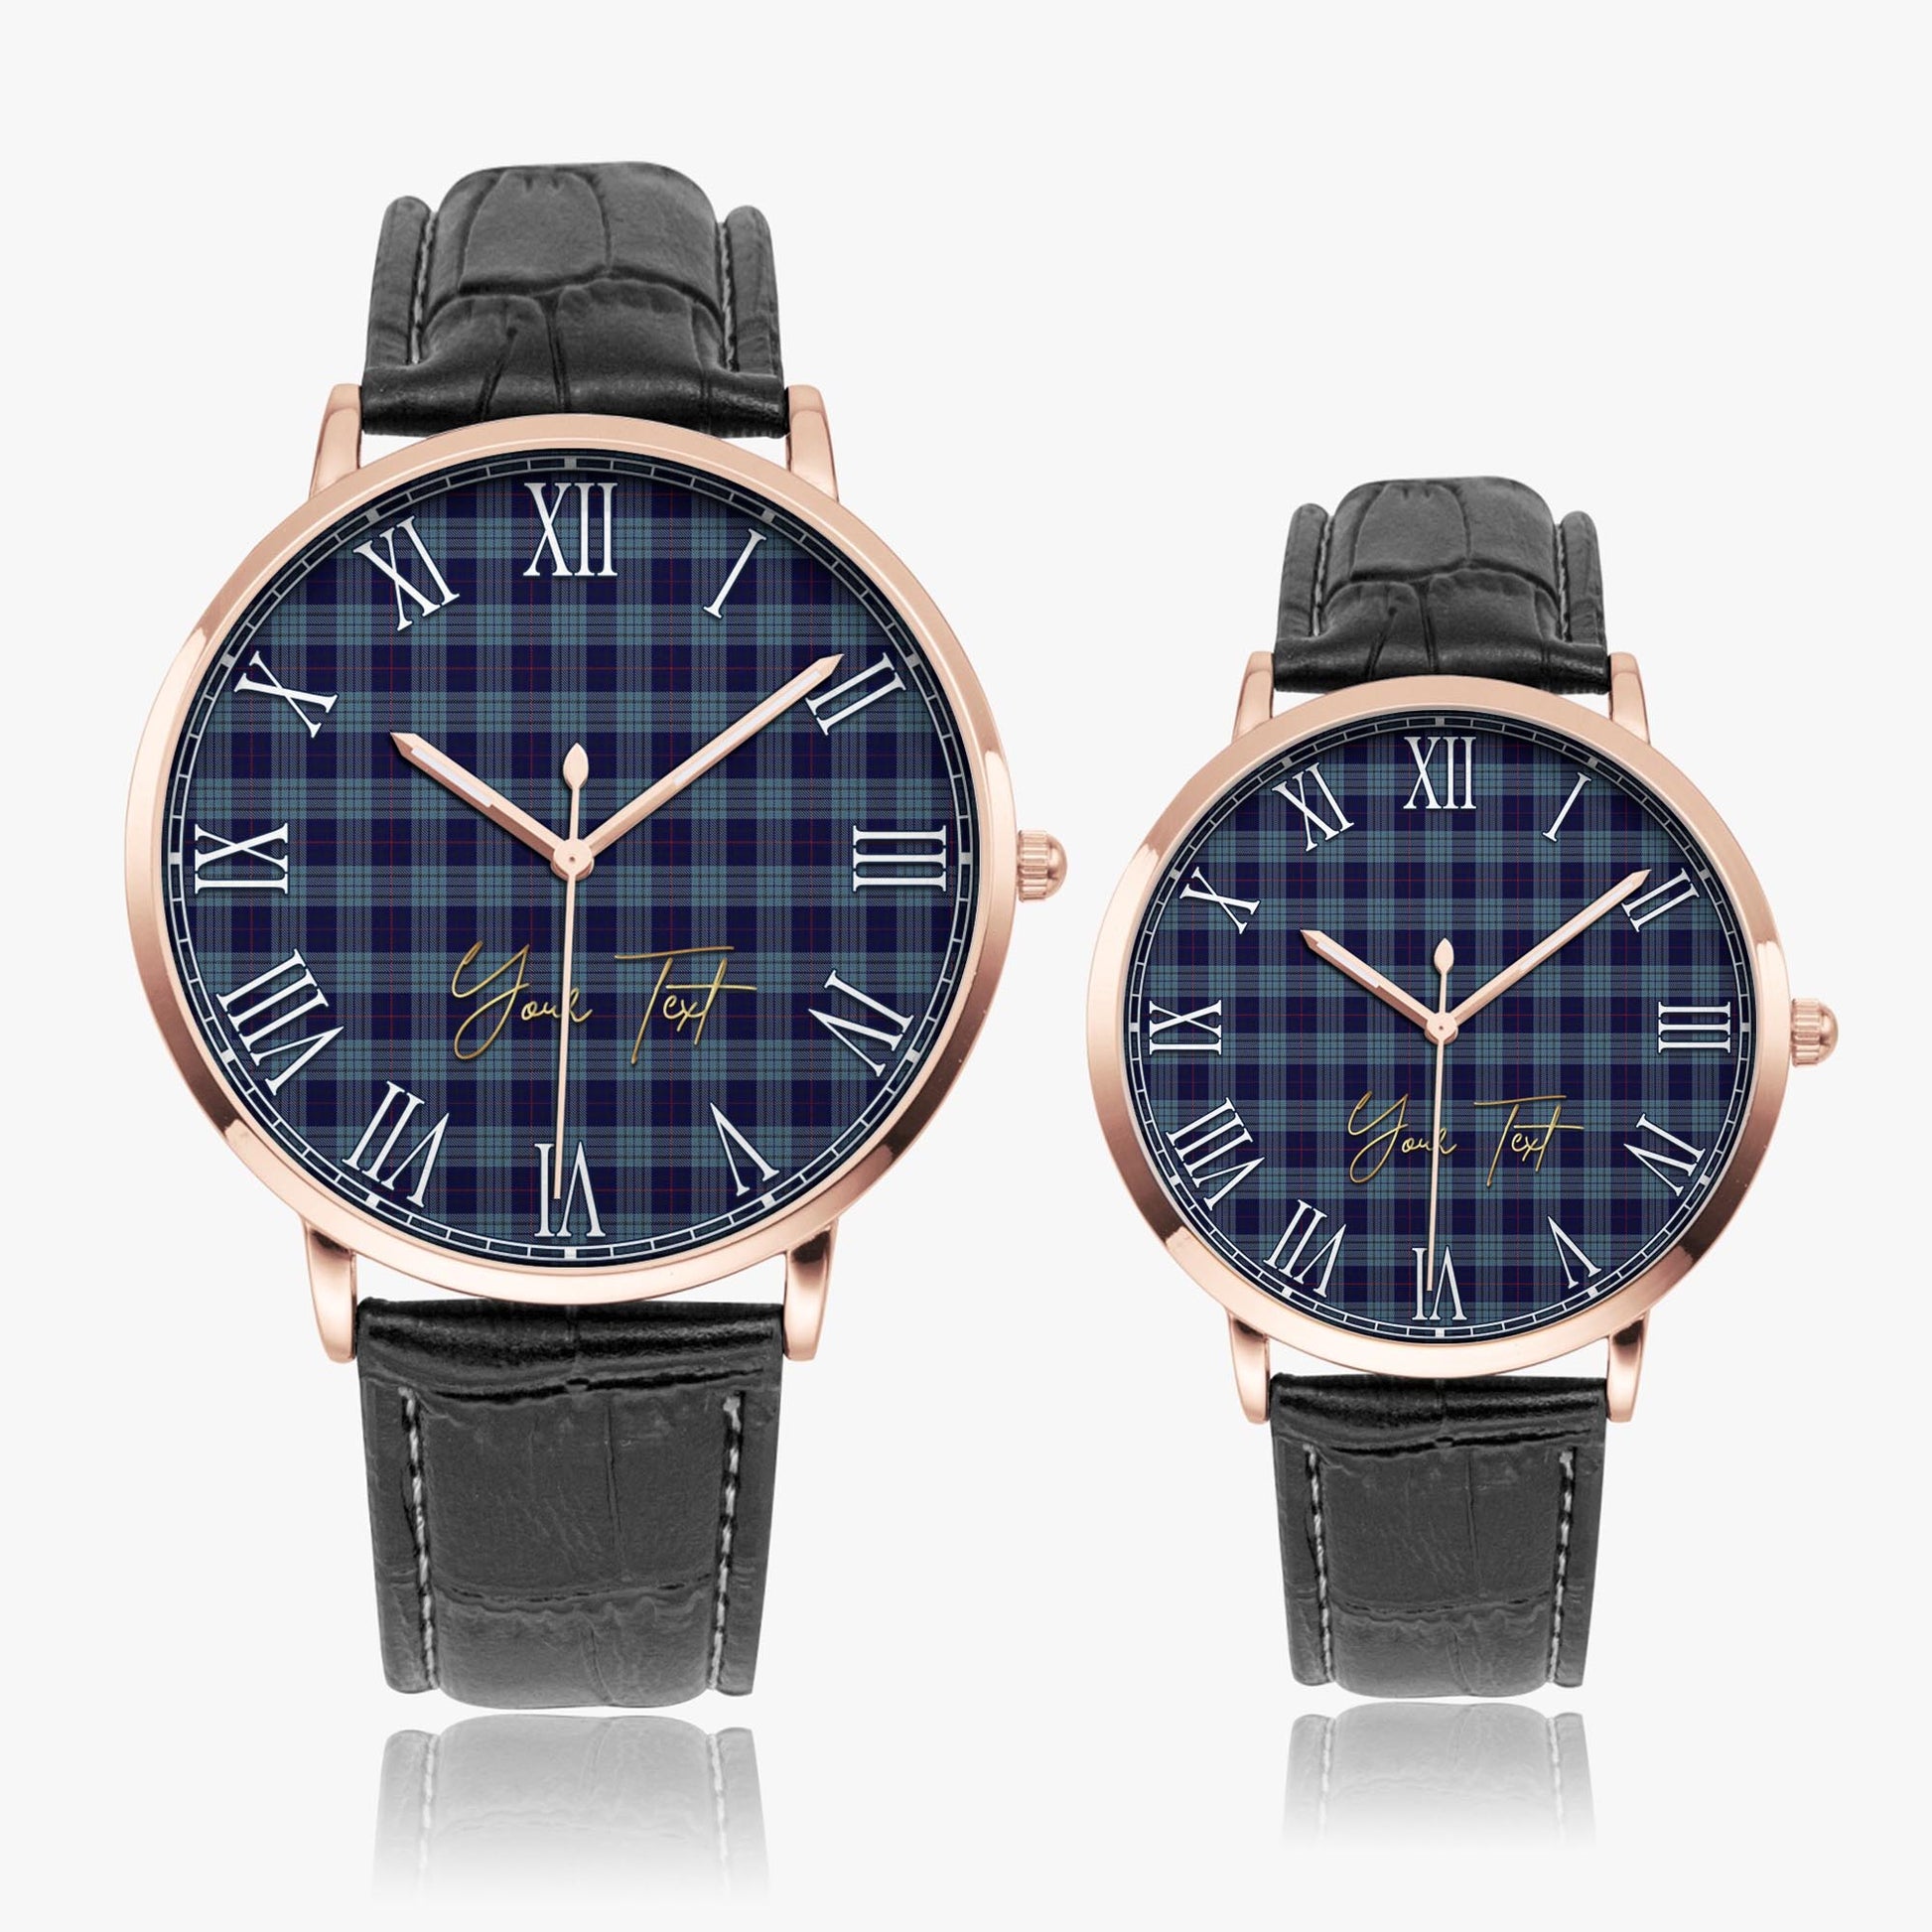 Roberts of Wales Tartan Personalized Your Text Leather Trap Quartz Watch Ultra Thin Rose Gold Case With Black Leather Strap - Tartanvibesclothing